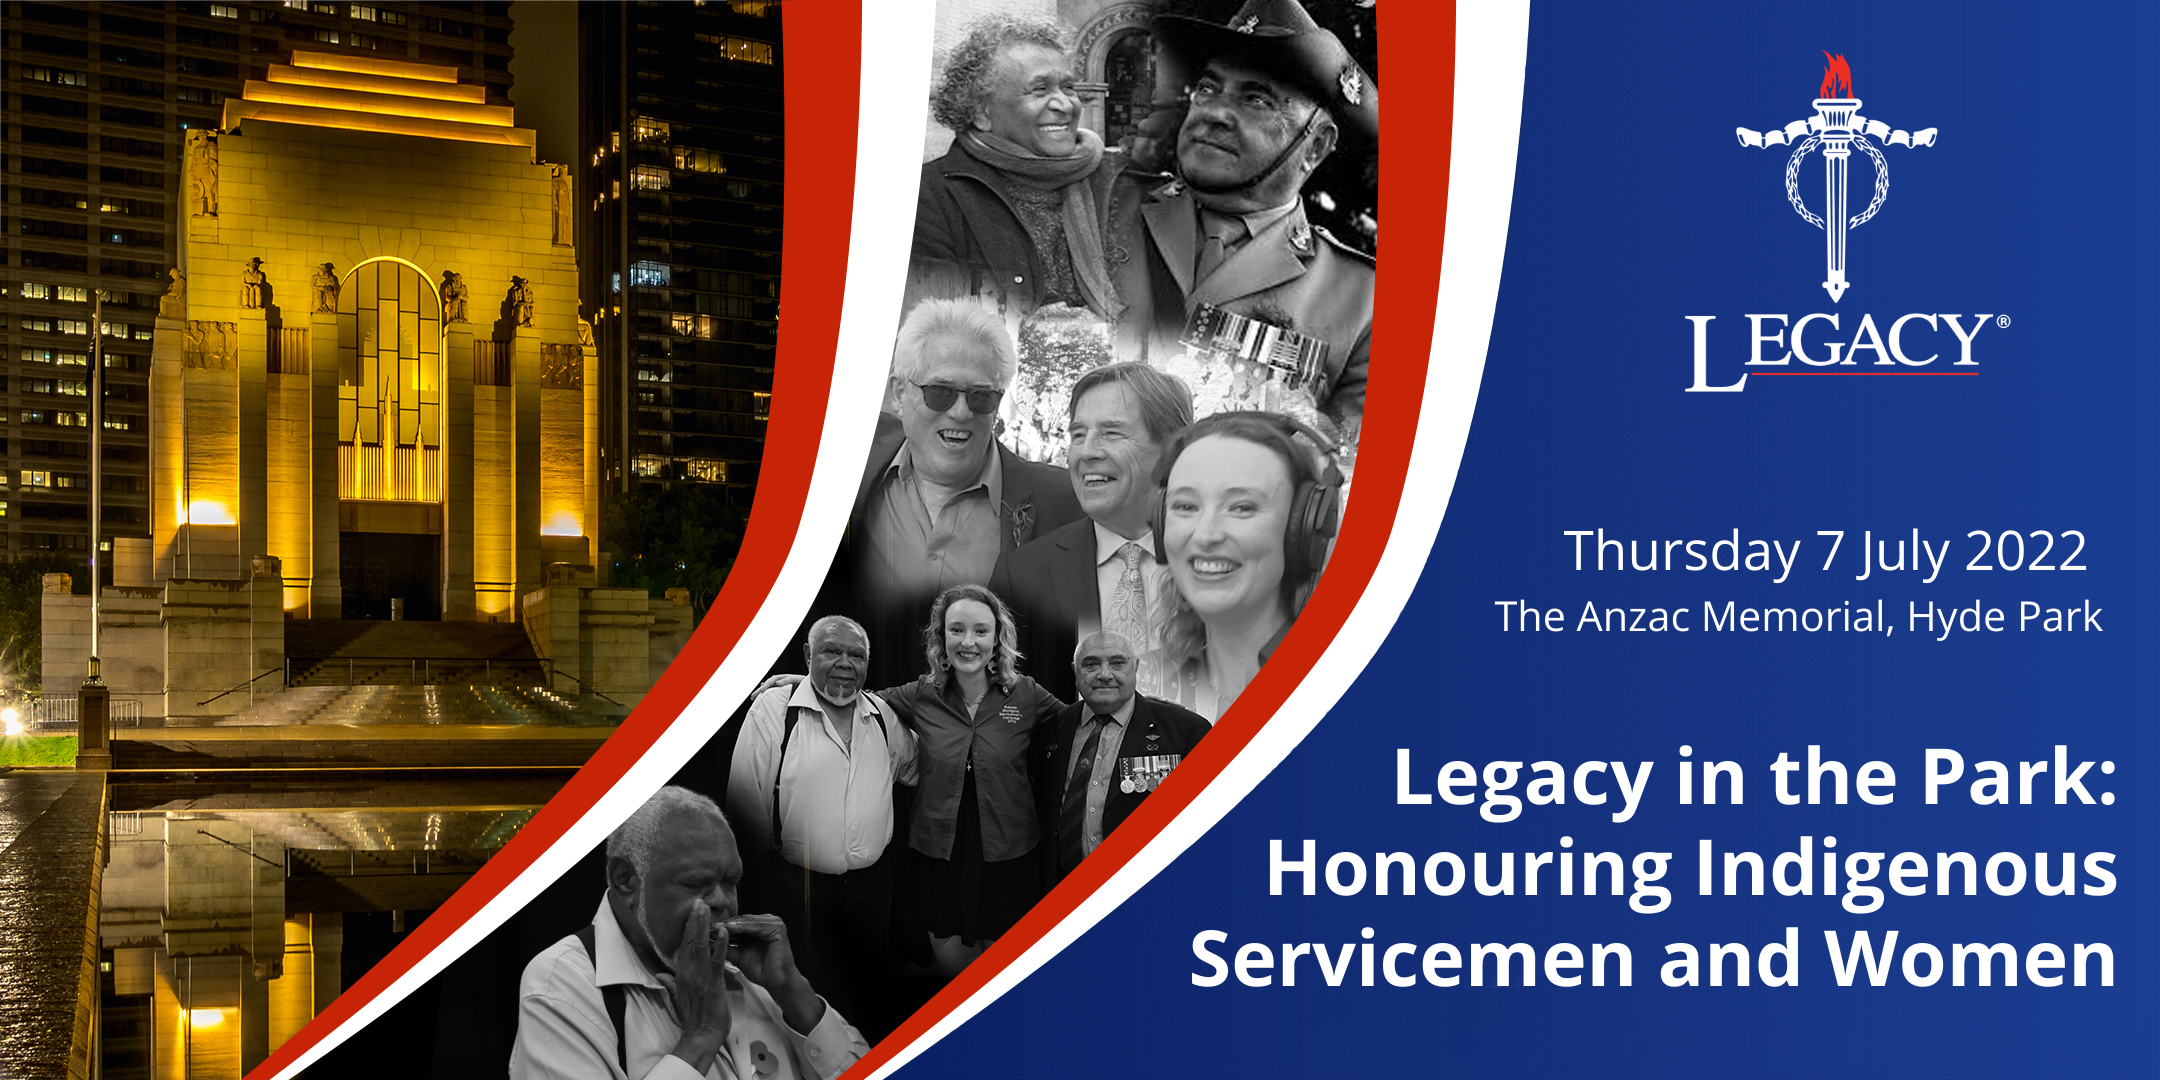 Legacy in the Park: Honouring Indigenous Servicemen and Women